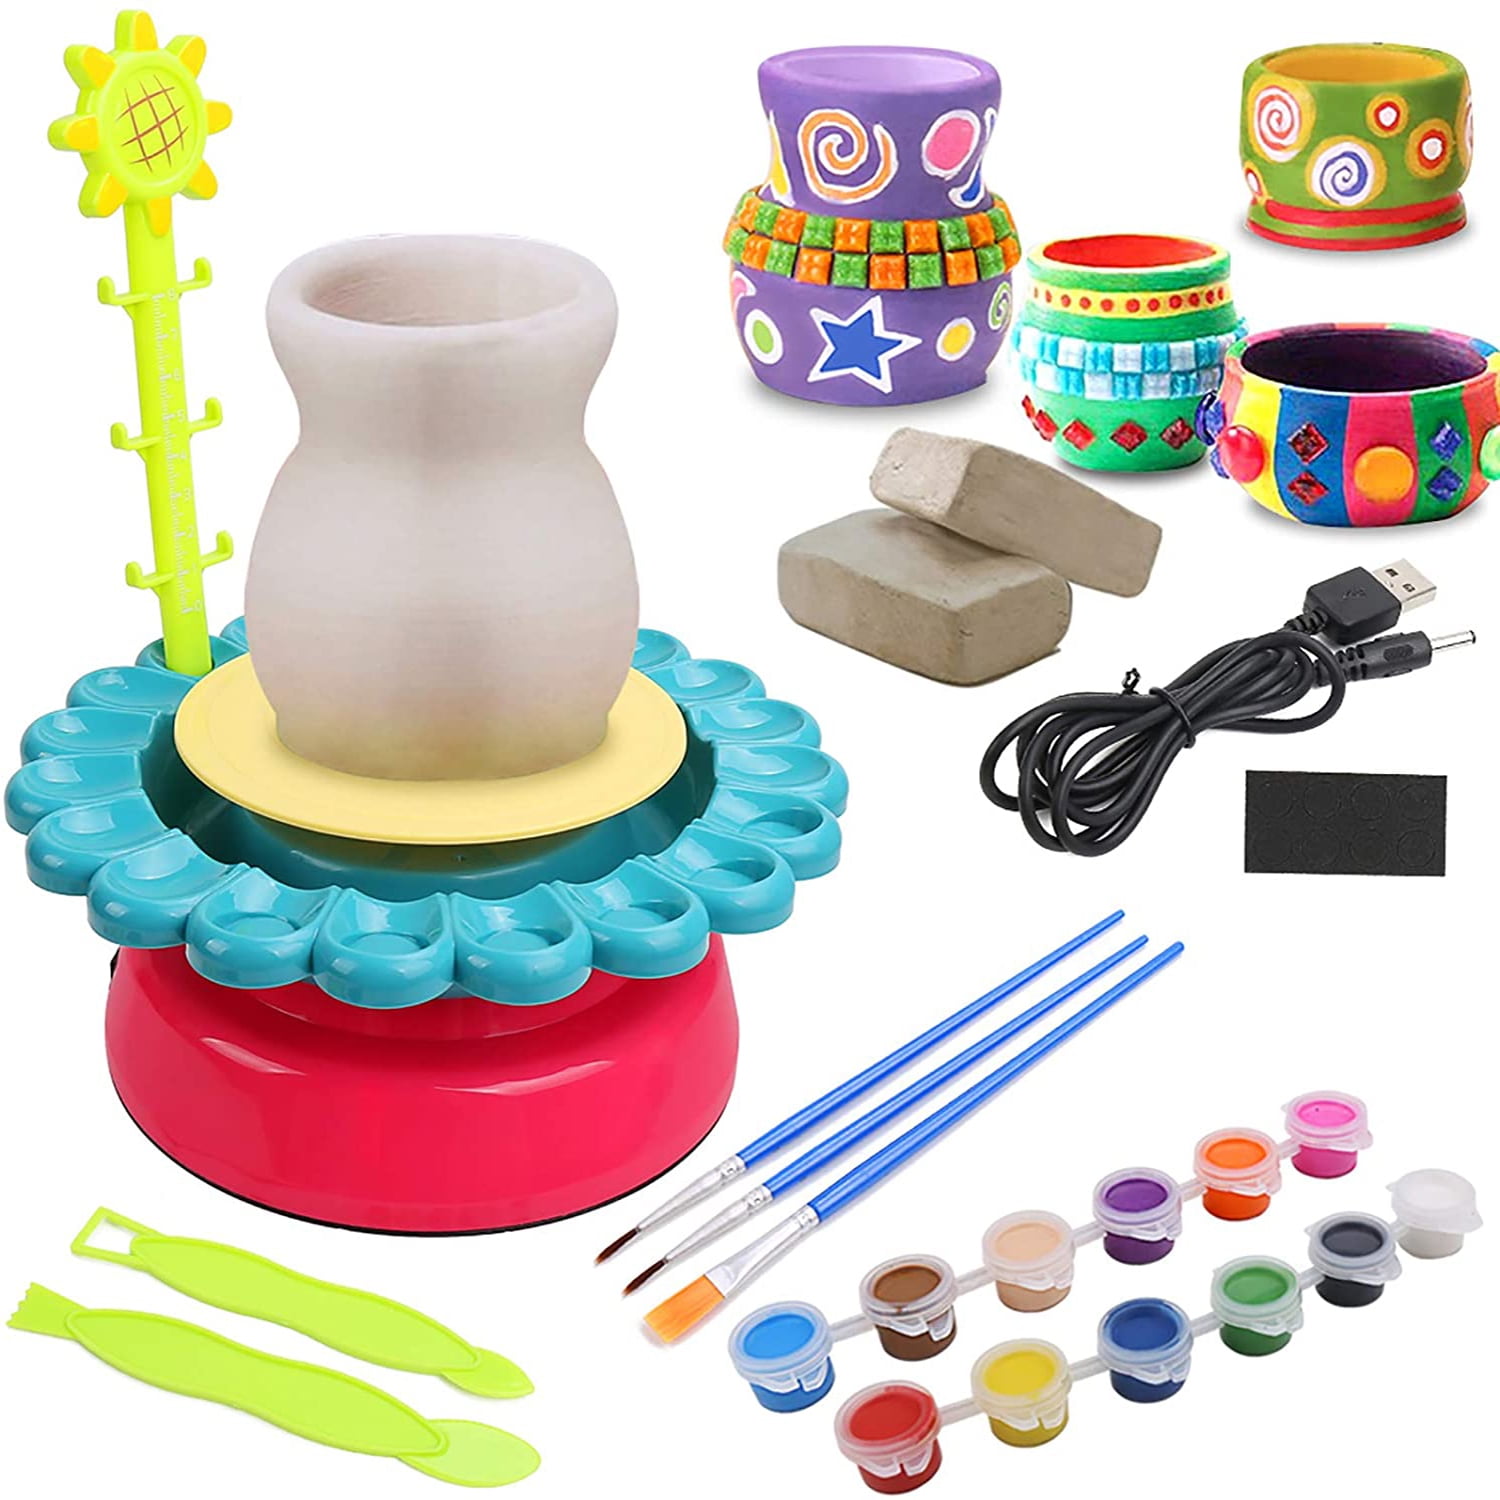  ToyUnited Pottery Wheel for Kids: Complete Pottery Kit for  Beginners with Air Dry Clay - Sculpting Clay Tools & Arts Supplies Arts -  Crafts for Girls Ages 4-8 Crafts Kits for